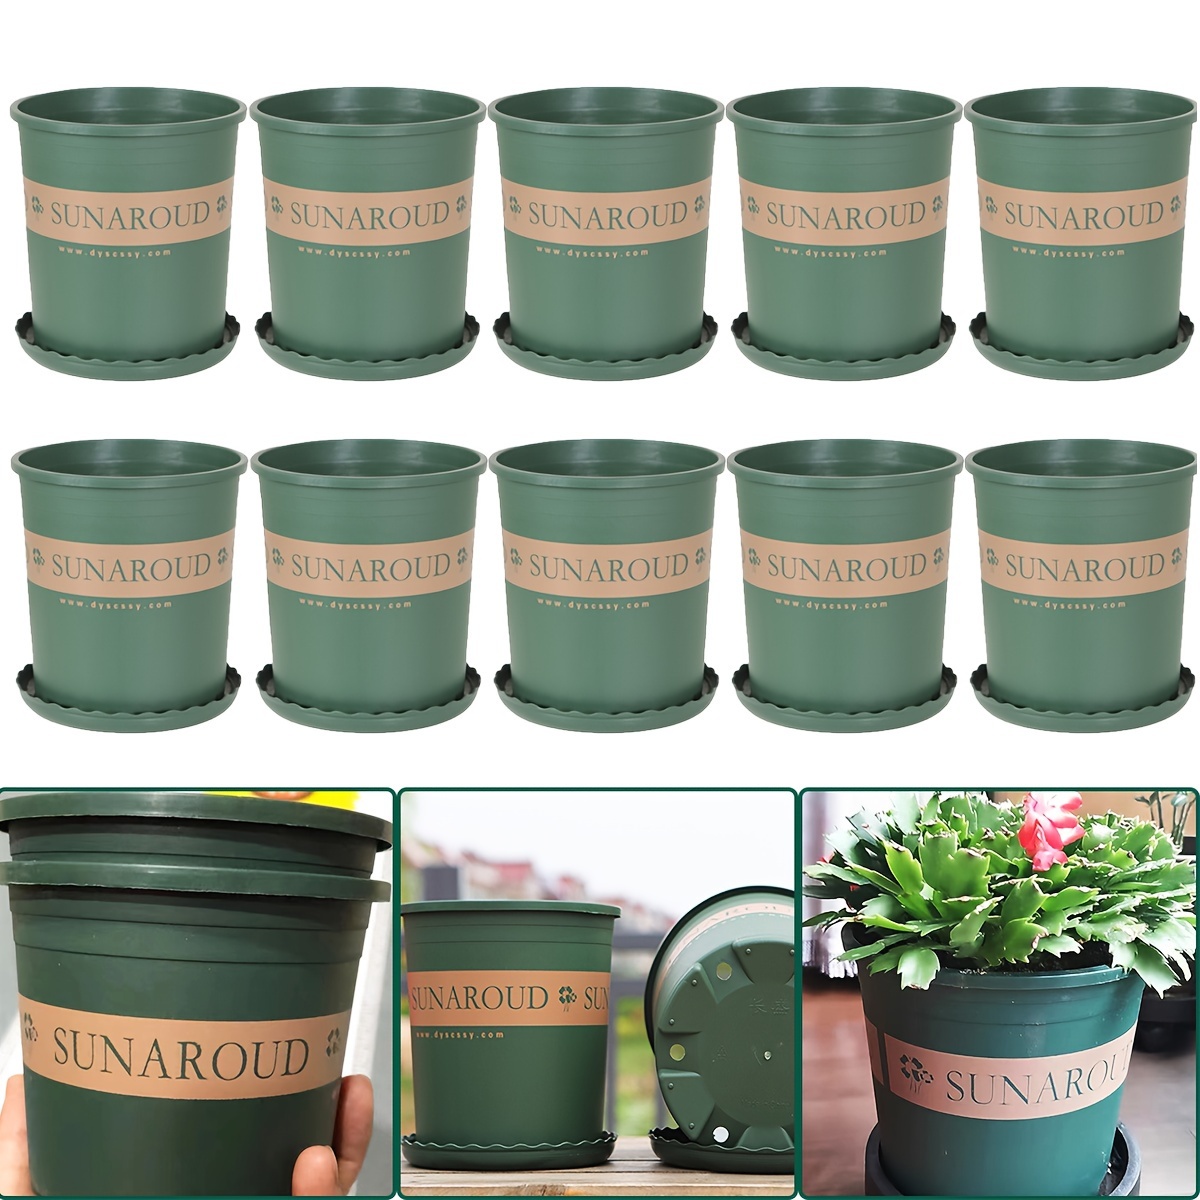 

10 Packs, 0.5 Gallon Green Printed Plastic Pot With Tray For Vegetable Flower Fruit Nursery Plant With Root Control Channel Design Garden Outdoor Indoor